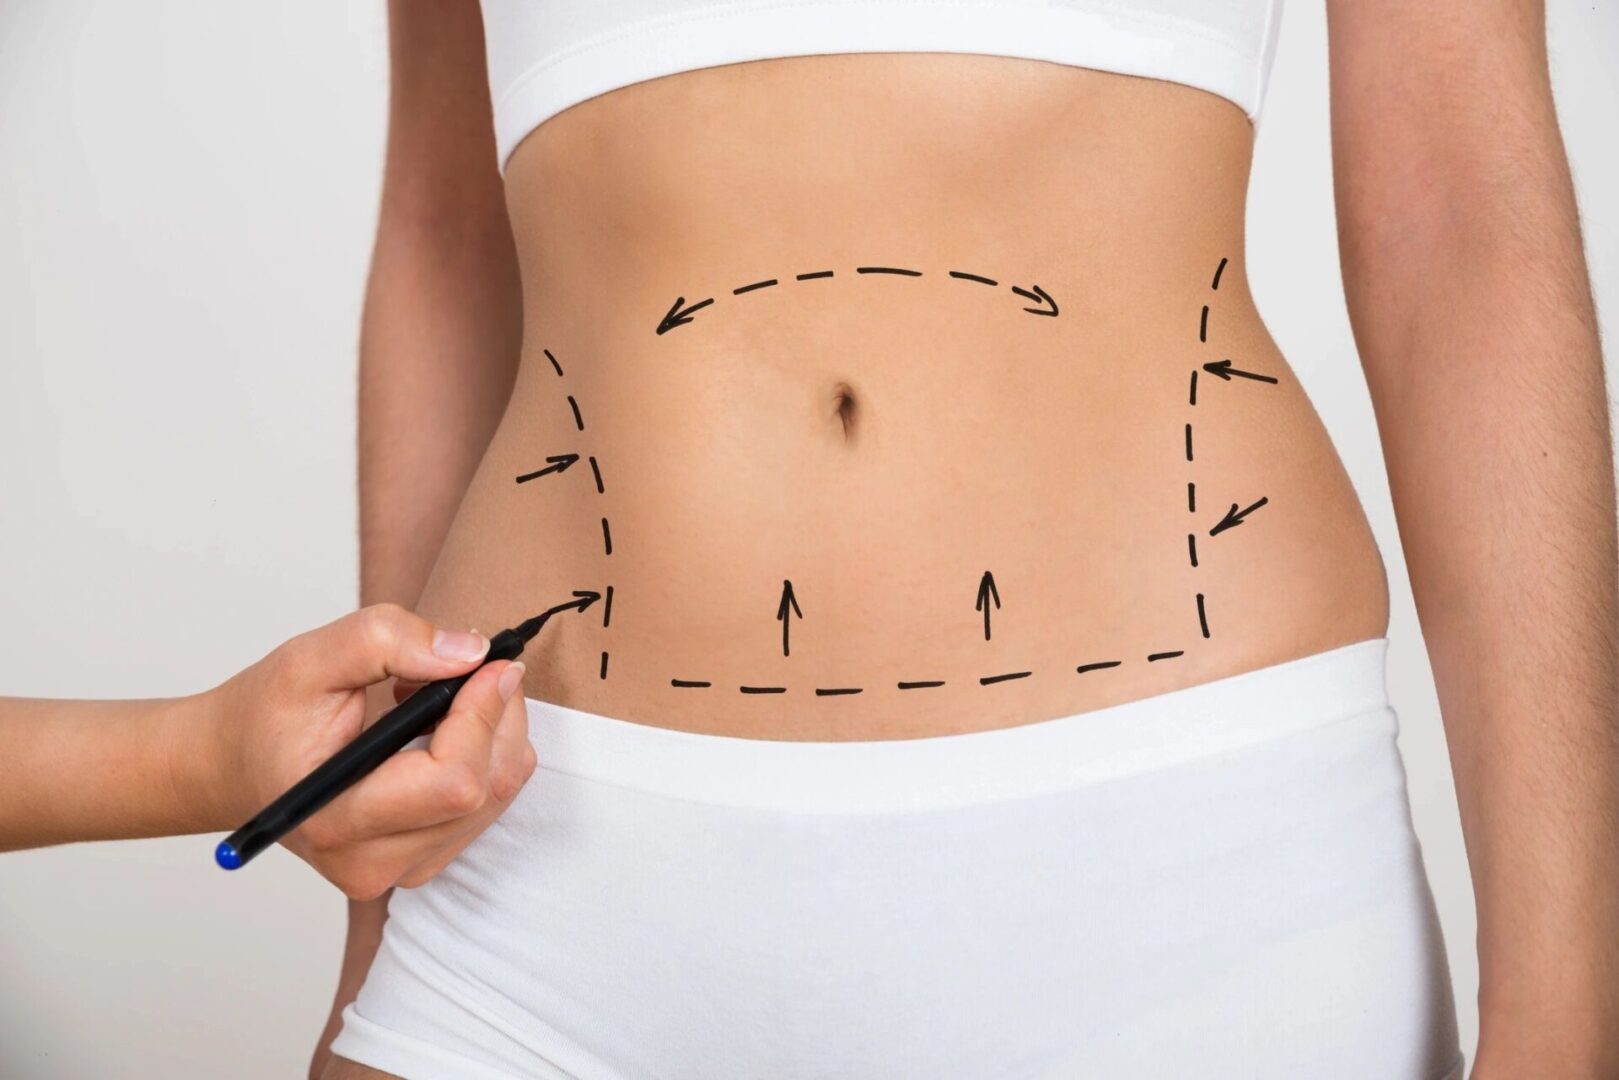 A woman is drawing lines on her stomach.